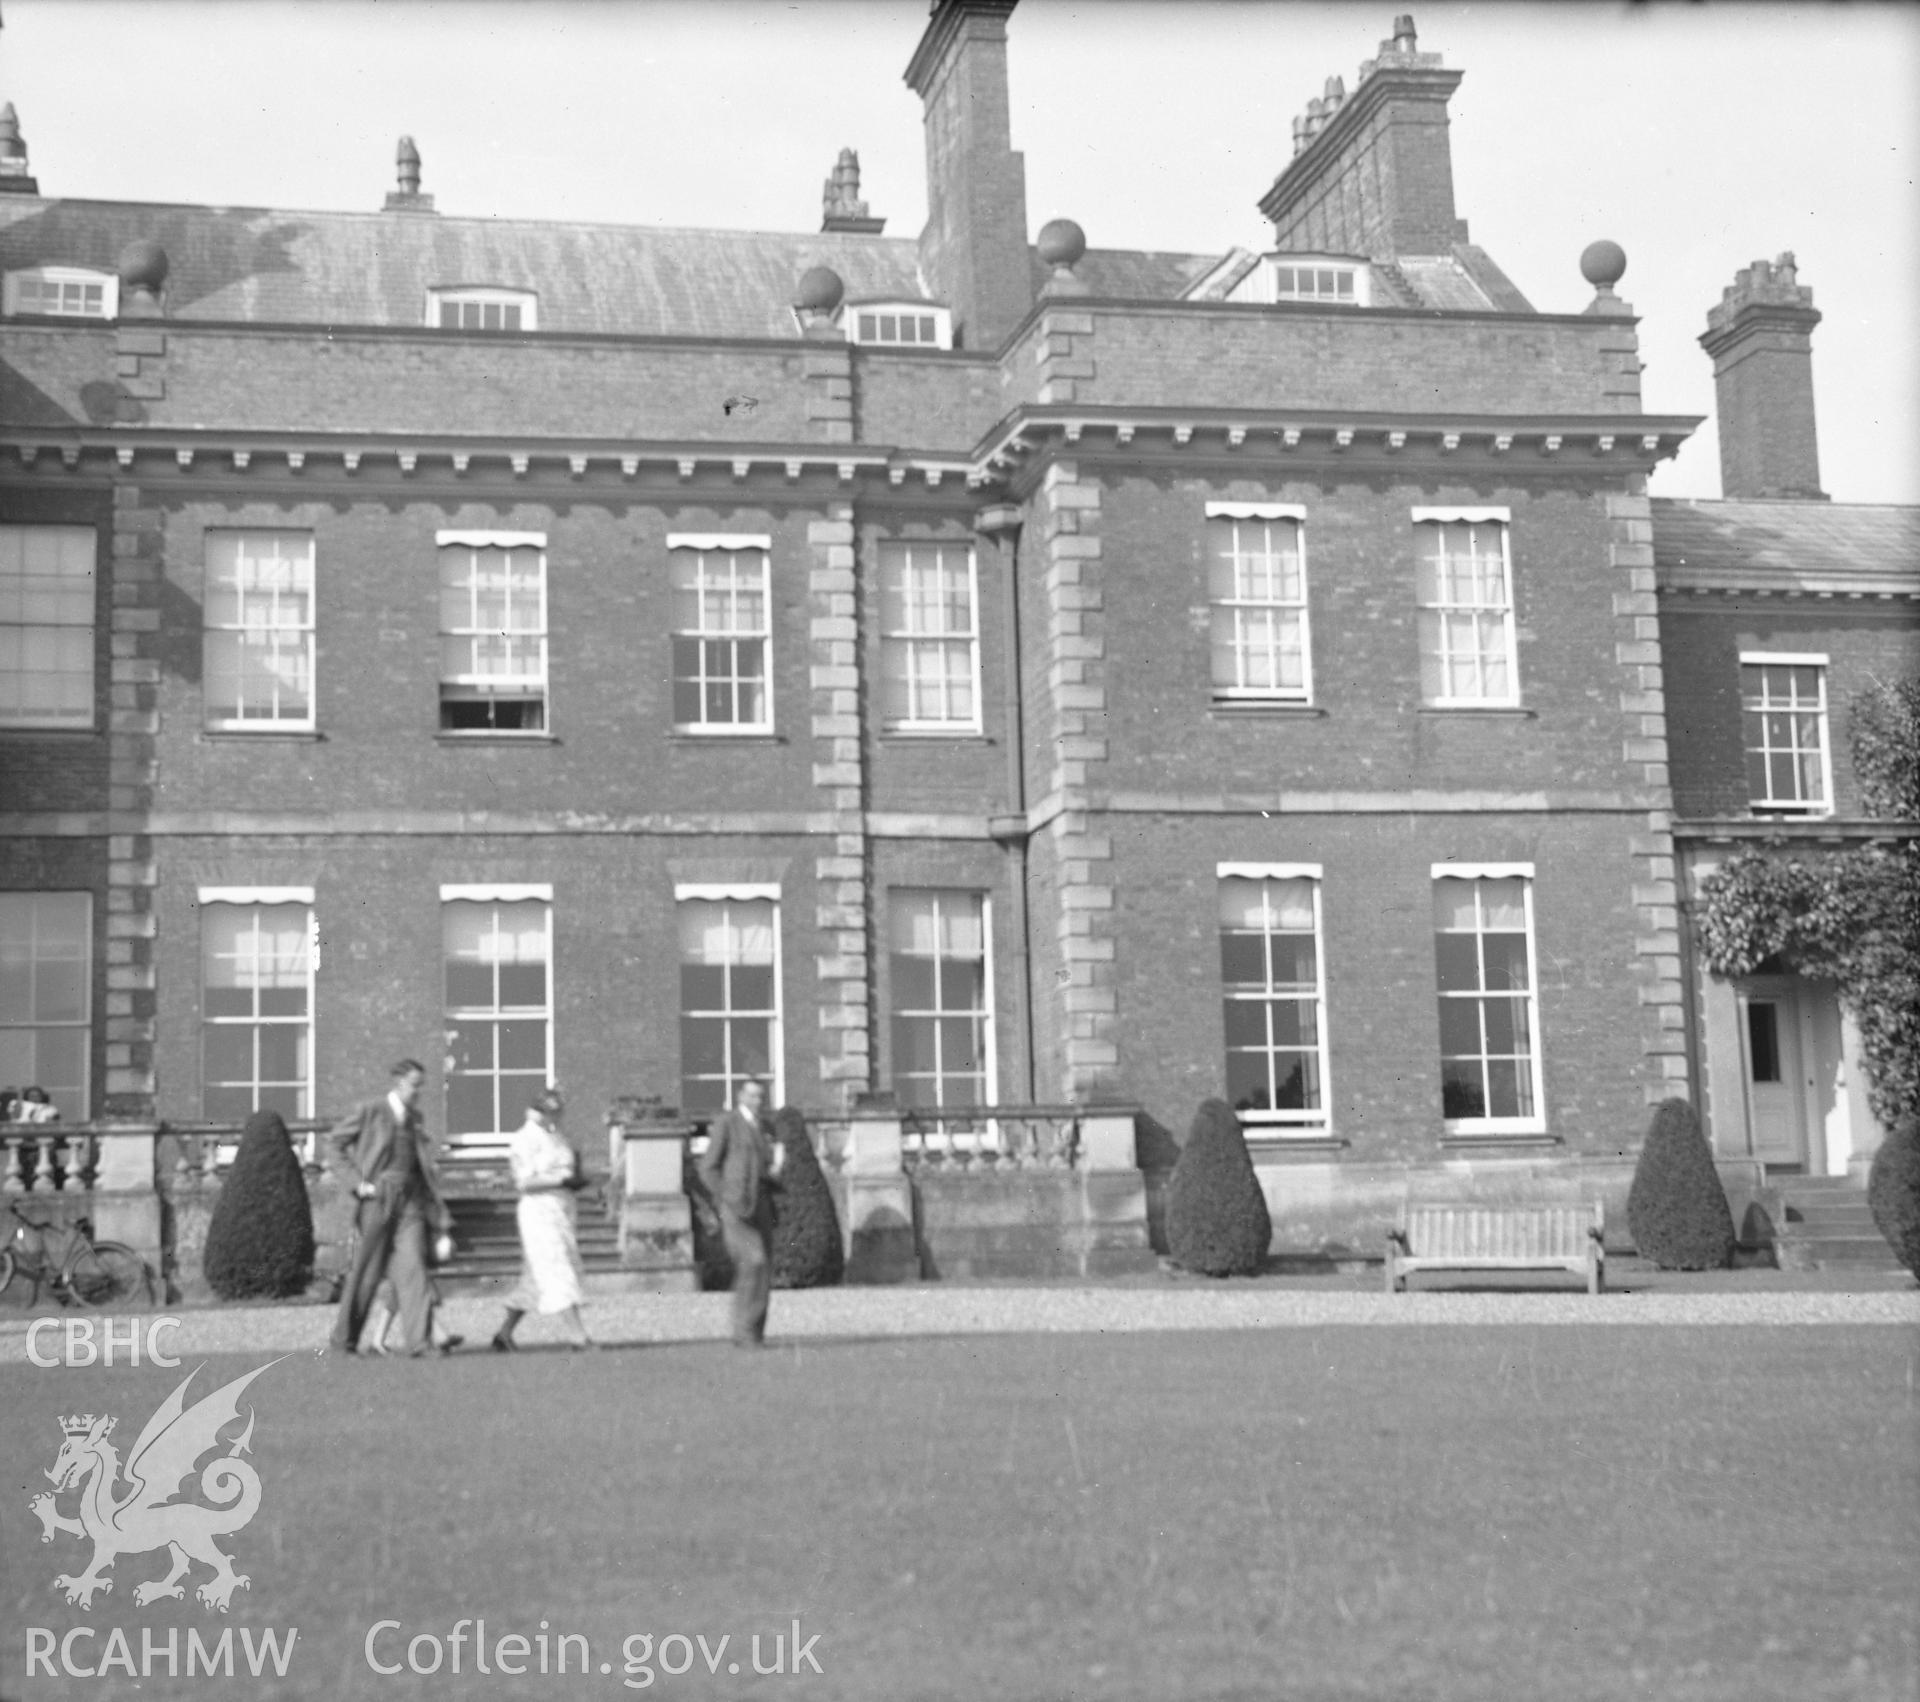 Digital copy of a black and white nitrate negative showing front of building in North Shropshire, captioned 'Larulnuis'.